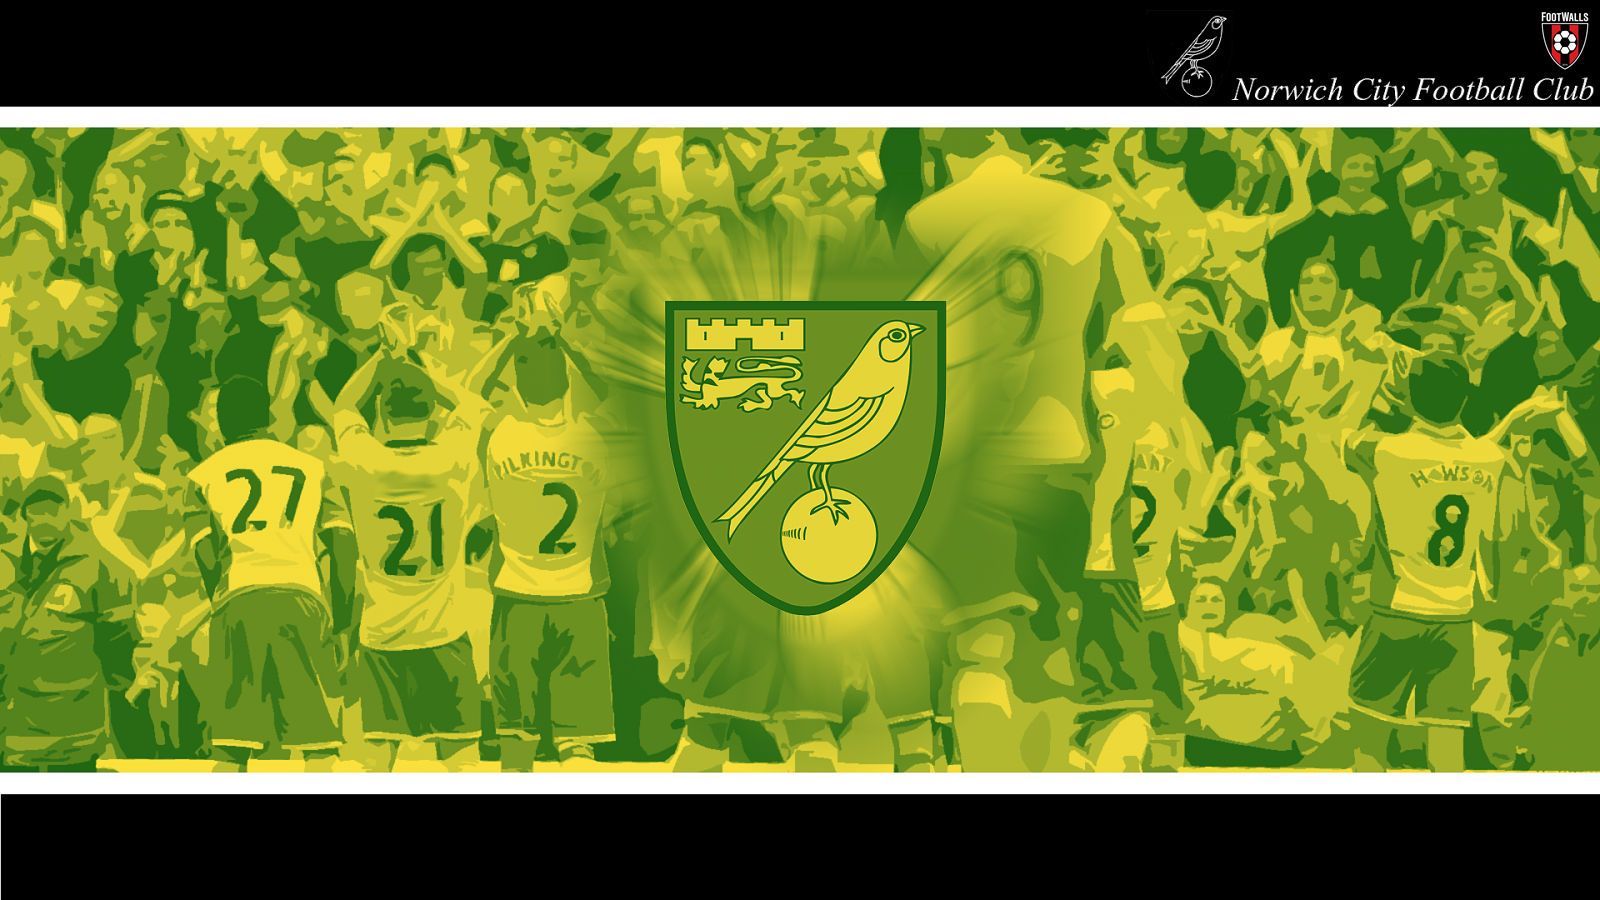 Norwich City F.c. Wallpapers - Wallpaper Cave